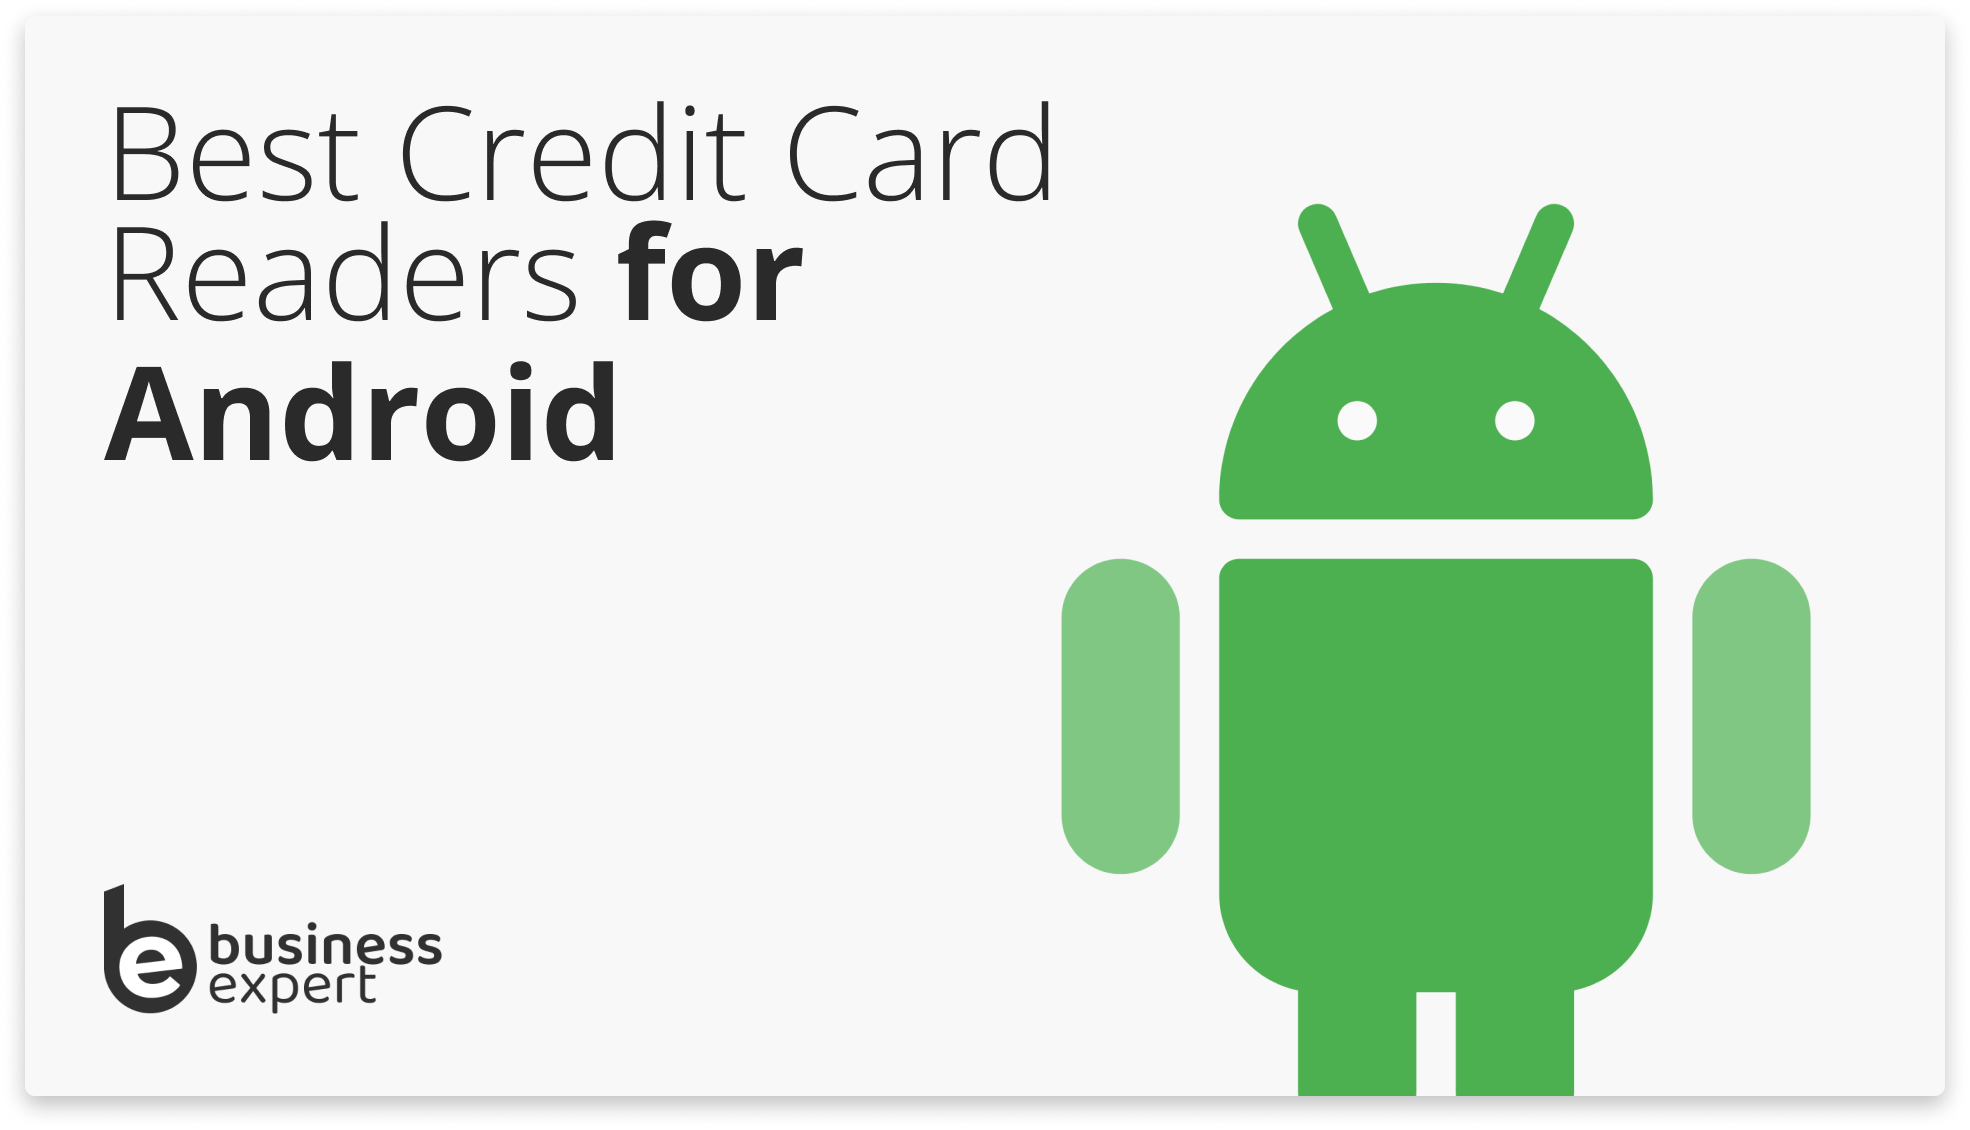 Best Credit Card Readers for Android